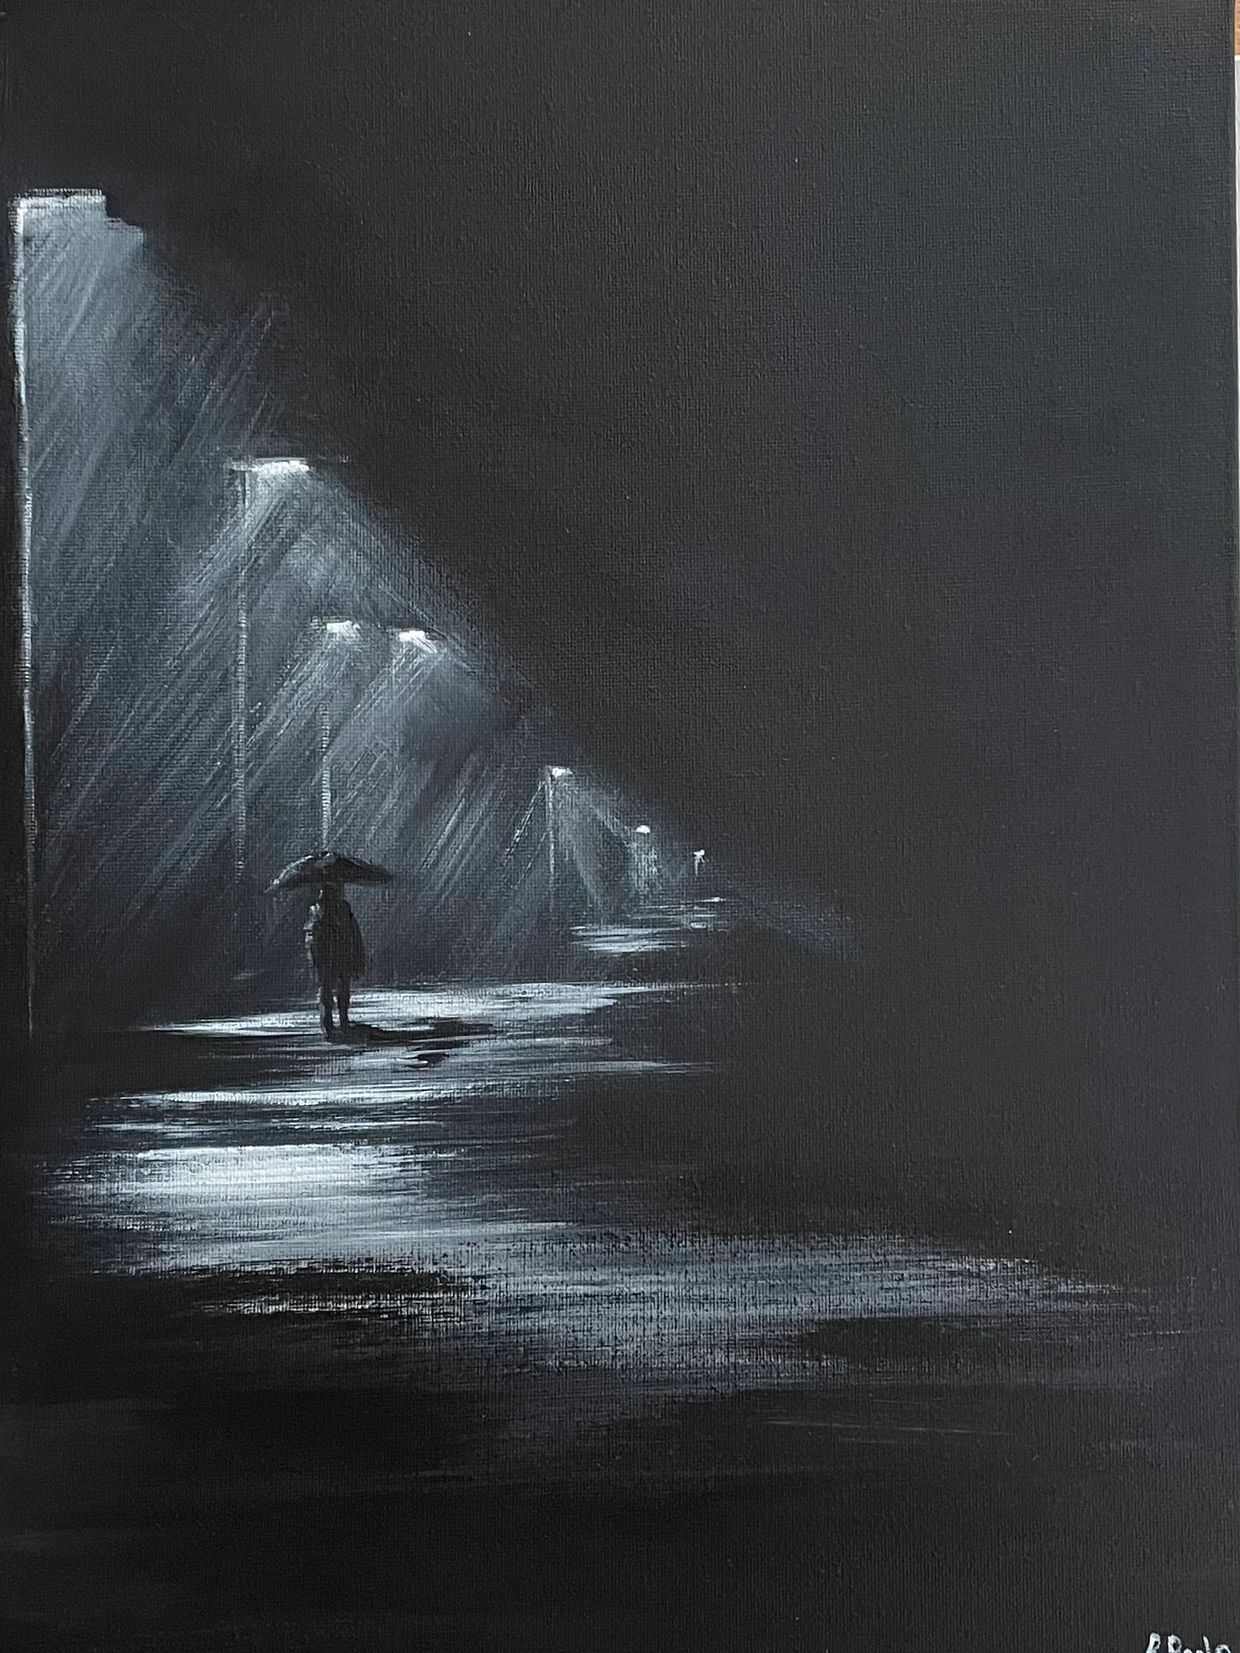 Solo
Person walking through a rainy path lit with street lamps at night.